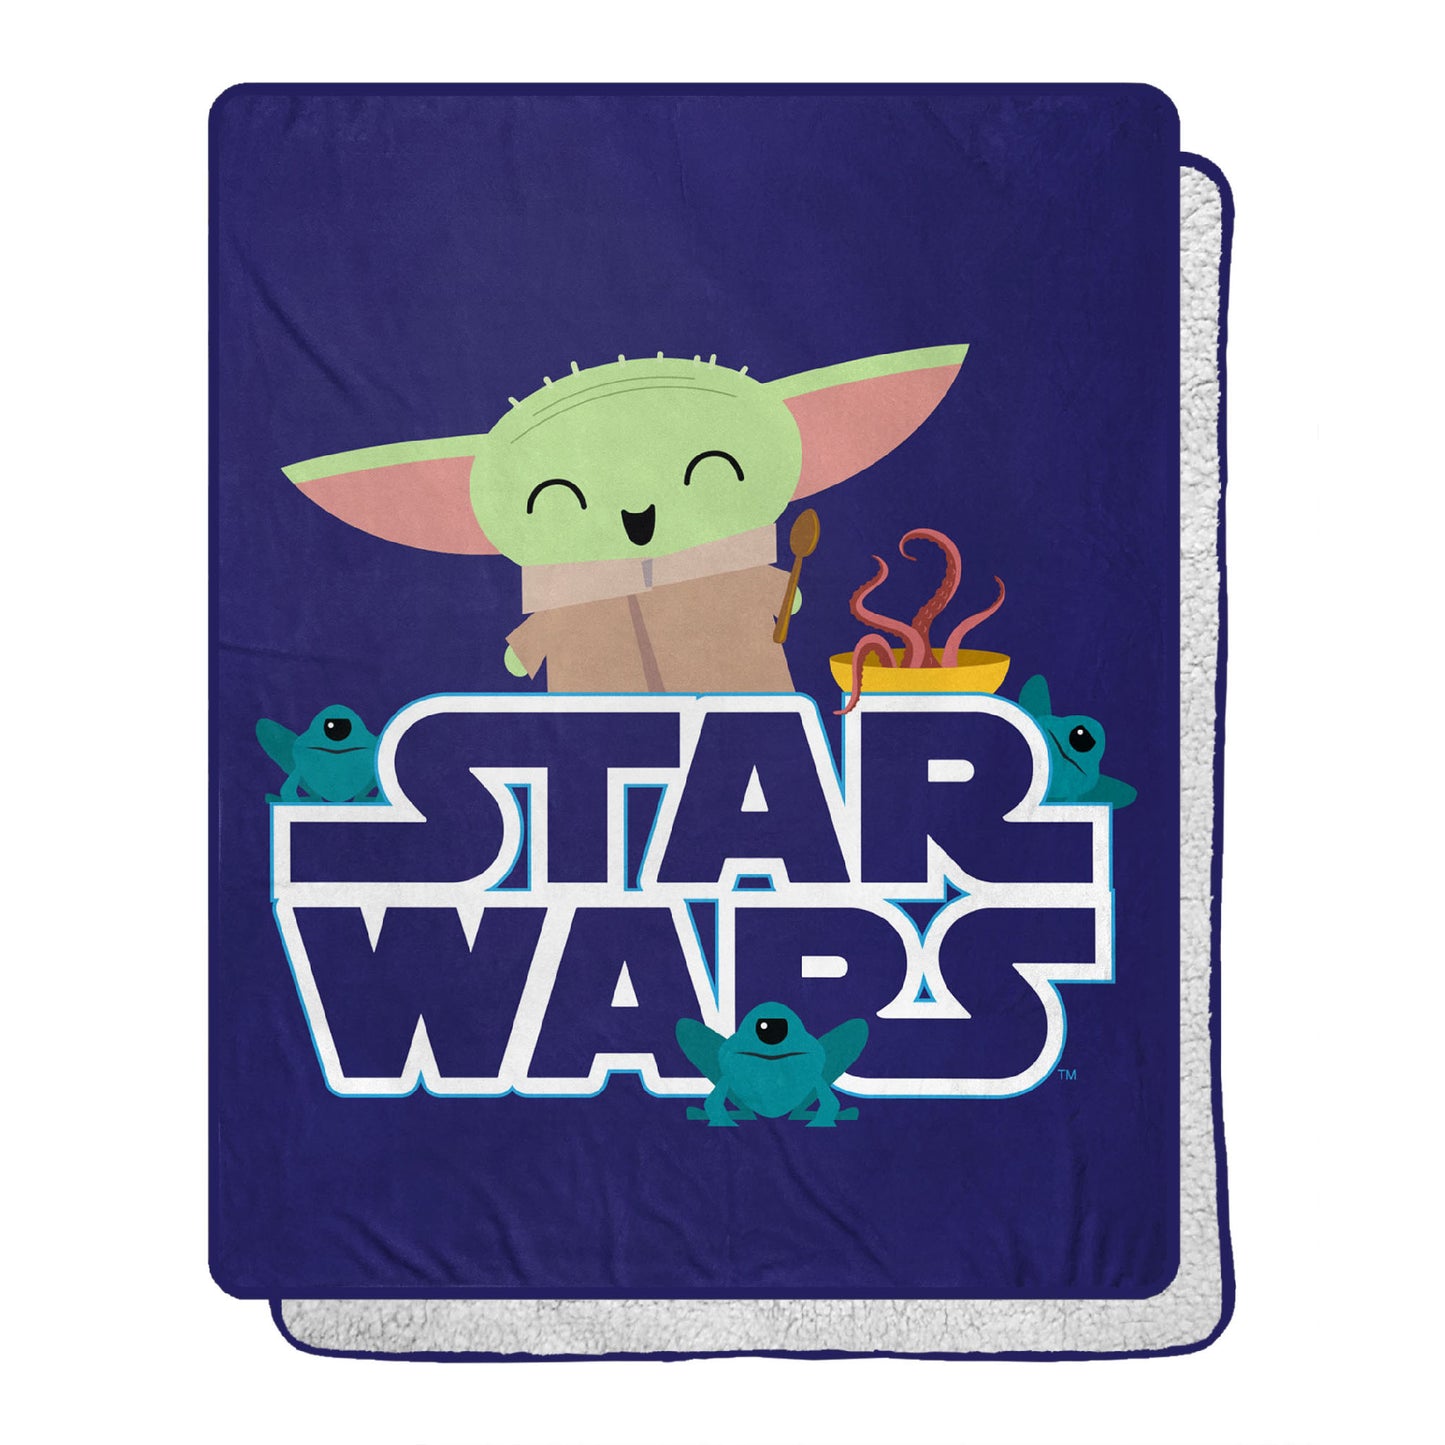 Star Wars: The Mandalorian "Snack is the Way" 40"x50" Sherpa Throw Blanket